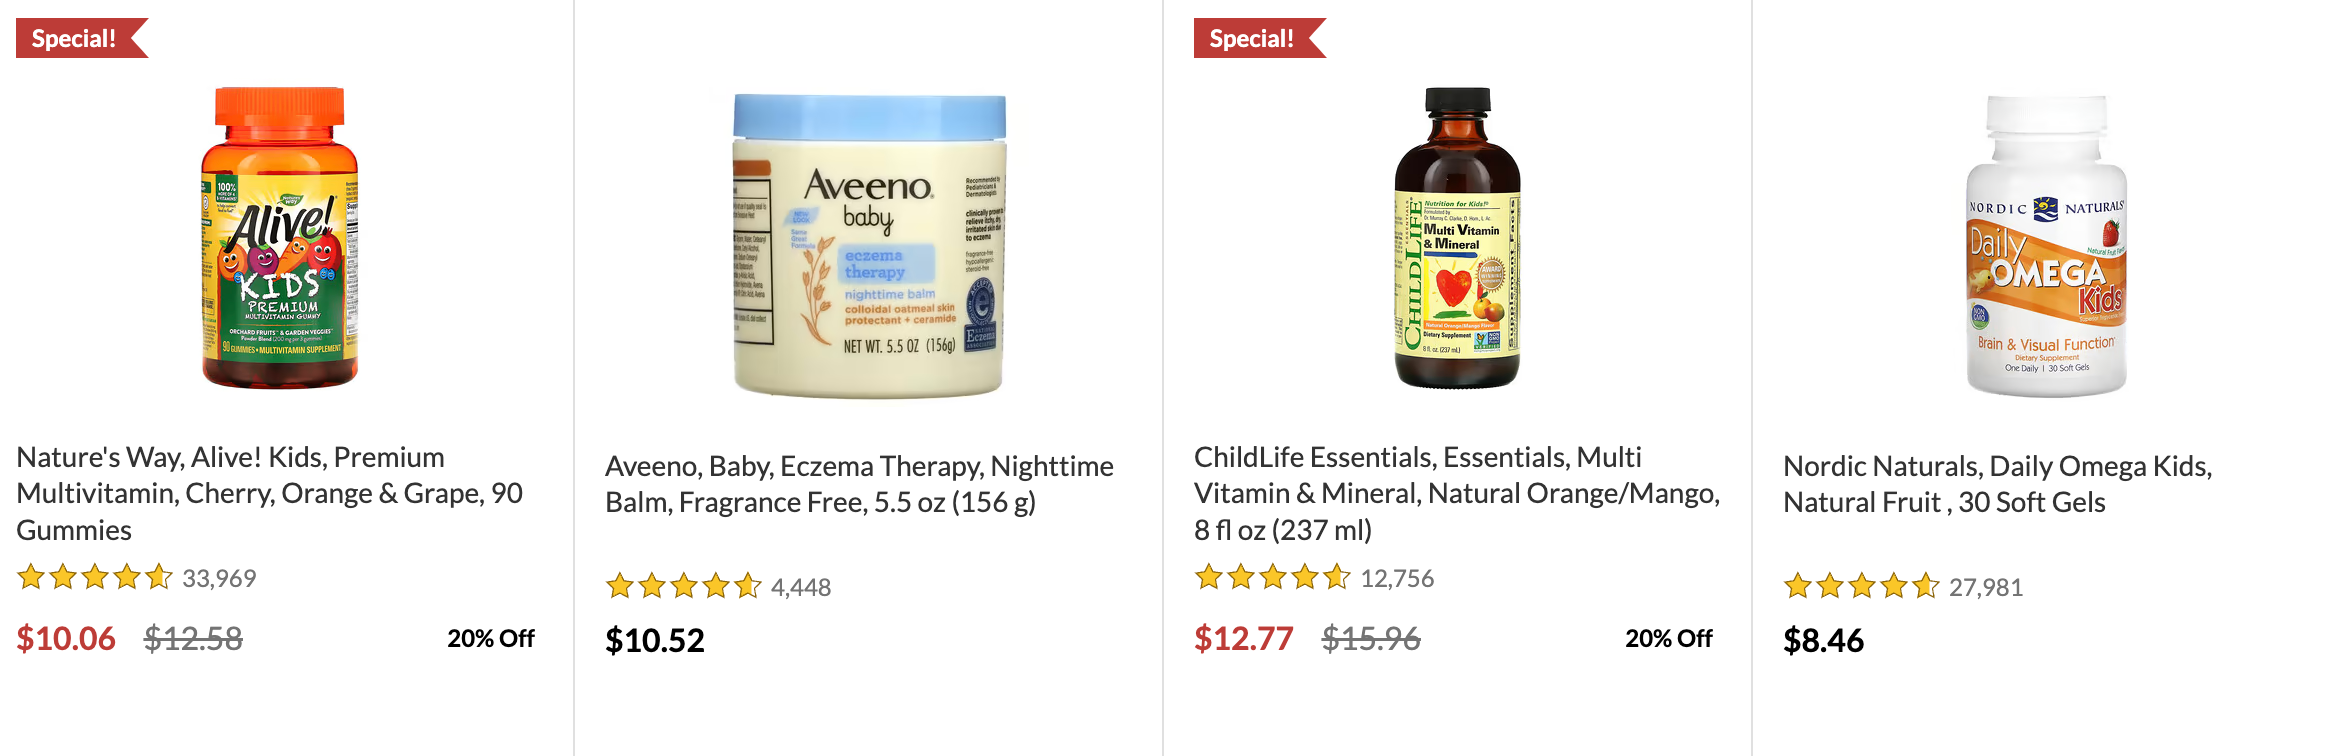 Nature’s Way Alive! Kids, Aveeno, ChildLife Essentials, Nordic Naturals among others